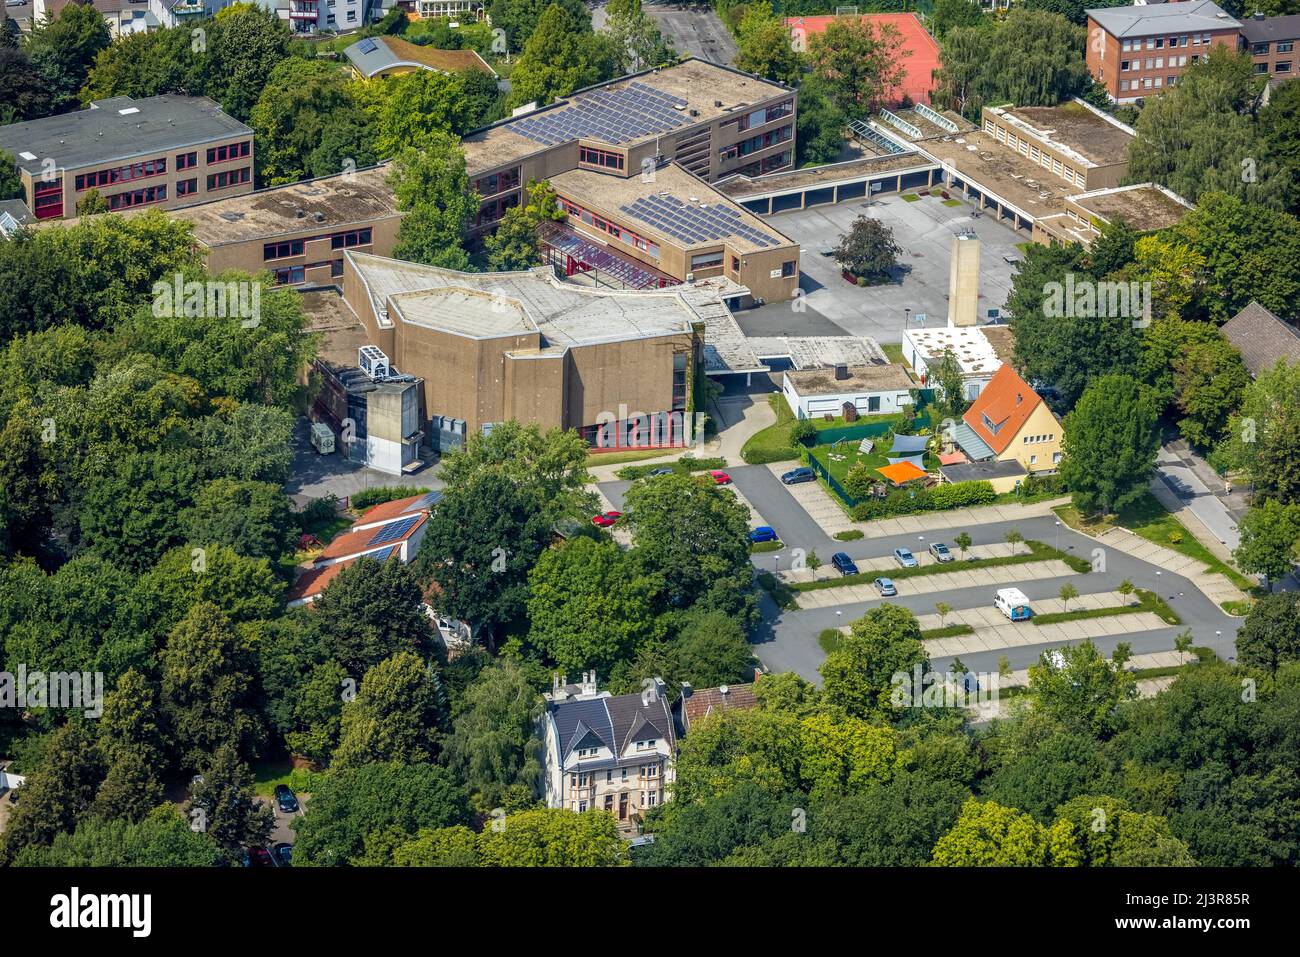 Aerial view, Kamen square shopping centre in Kampstraße in the district of Kolonie Tannenberg, Kamen, Ruhr area, North Rhine-Westphalia, Germany, Luft Stock Photo